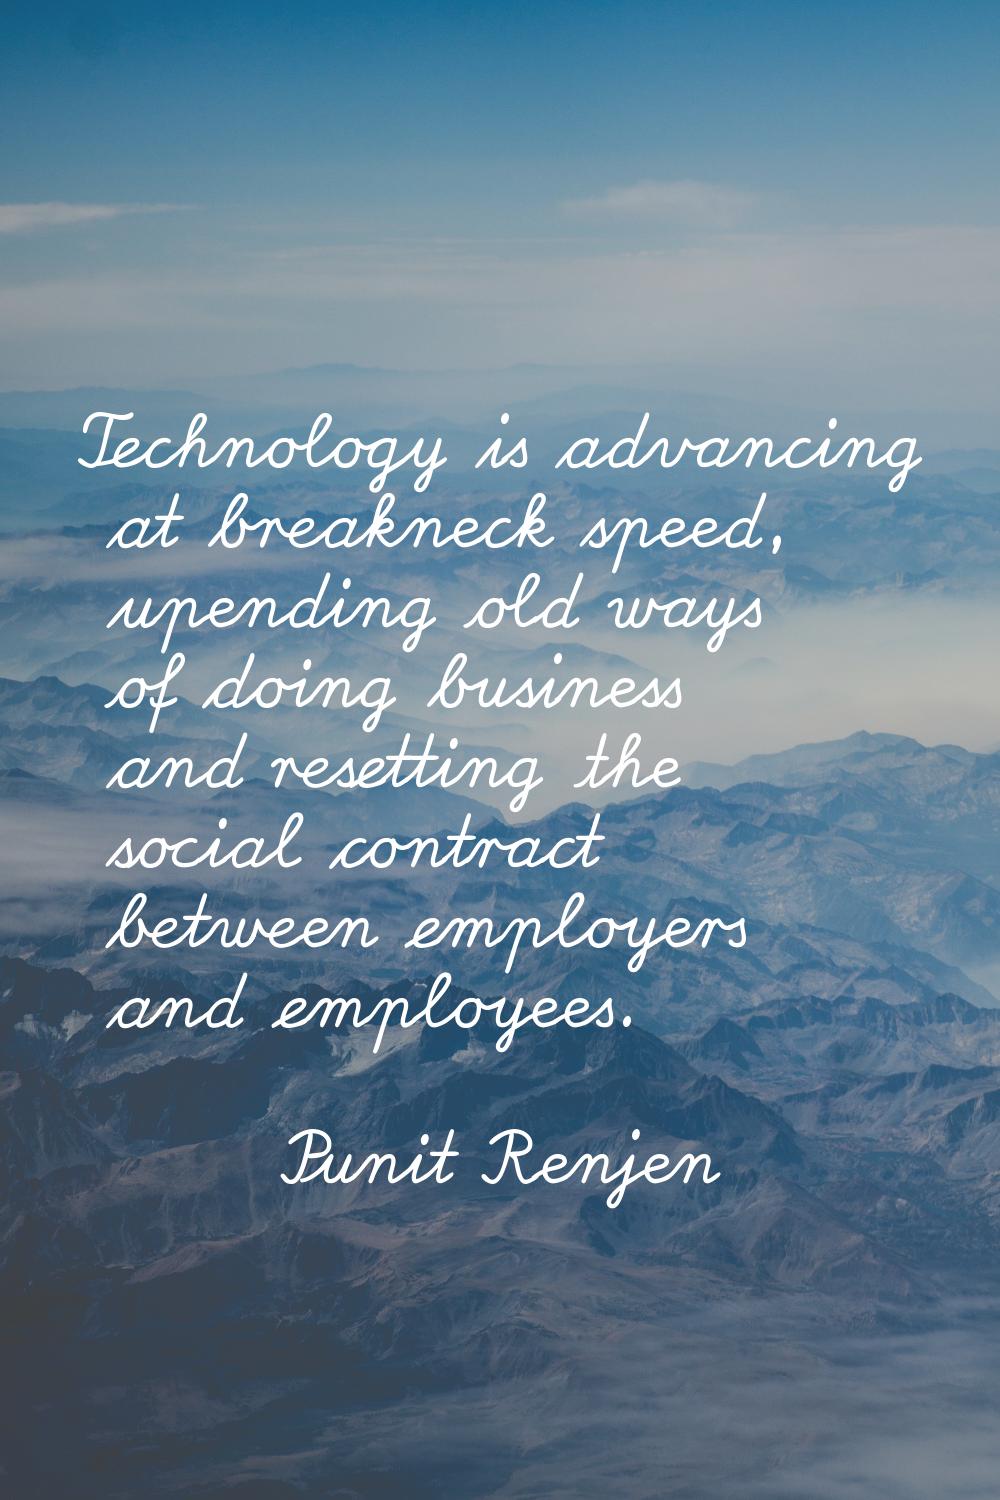 Technology is advancing at breakneck speed, upending old ways of doing business and resetting the s